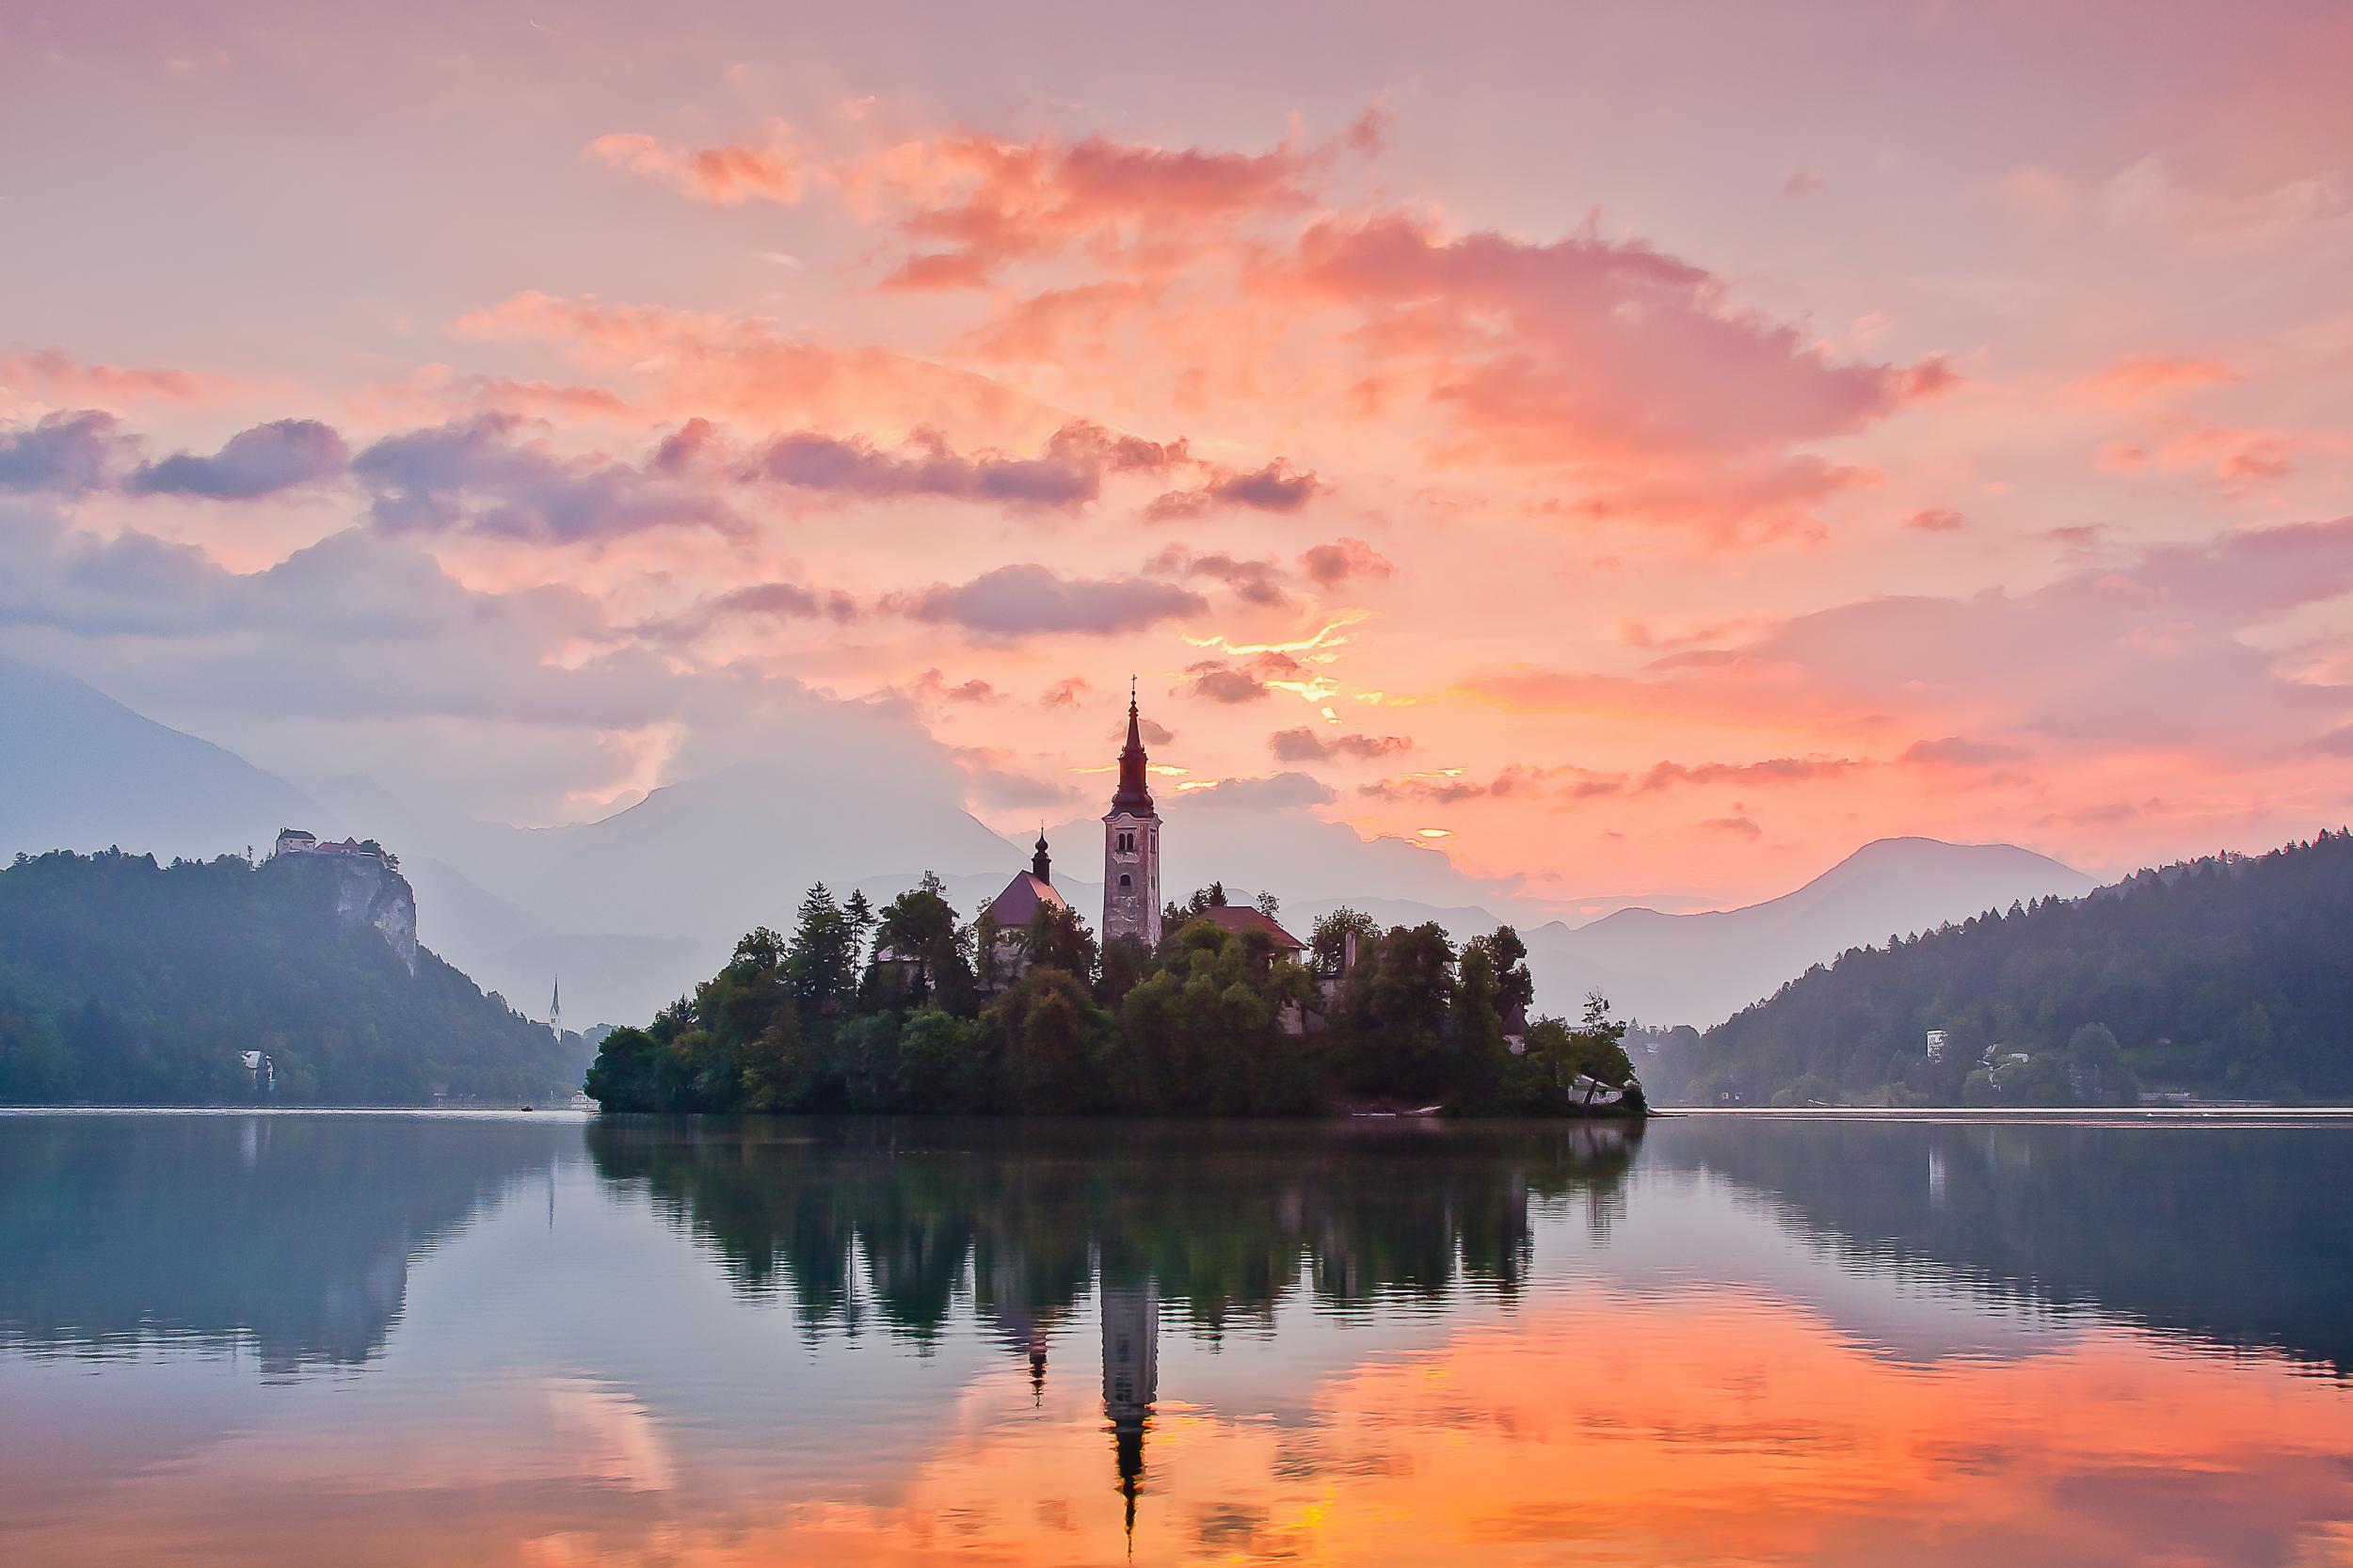 Nearby Lake Bled is the perfect day trip